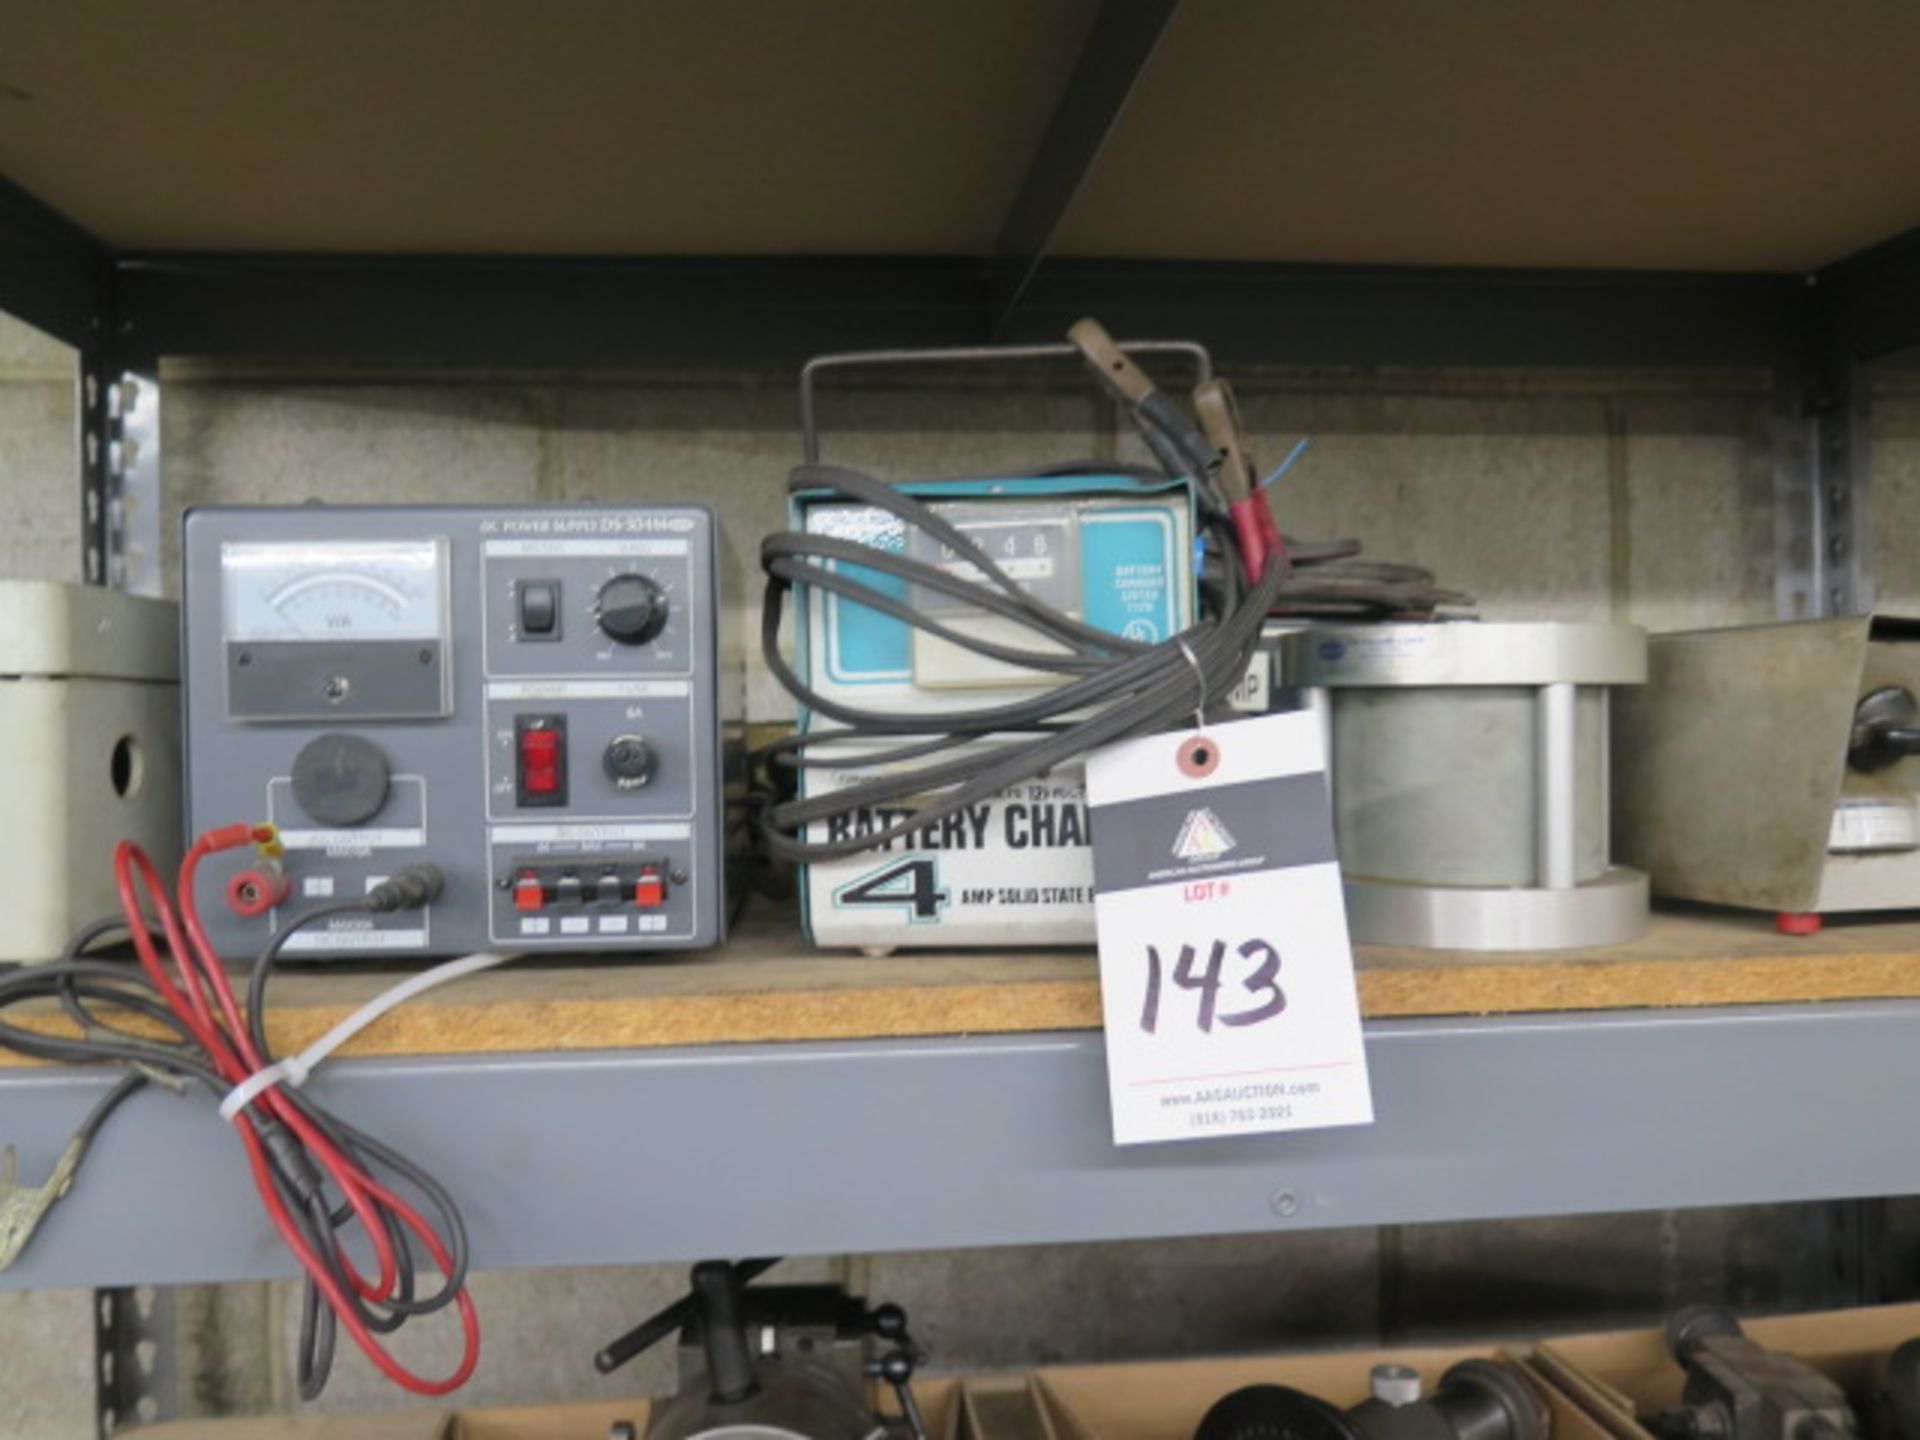 Power Supplies, Battery Chargers, Motor Controllers and Misc